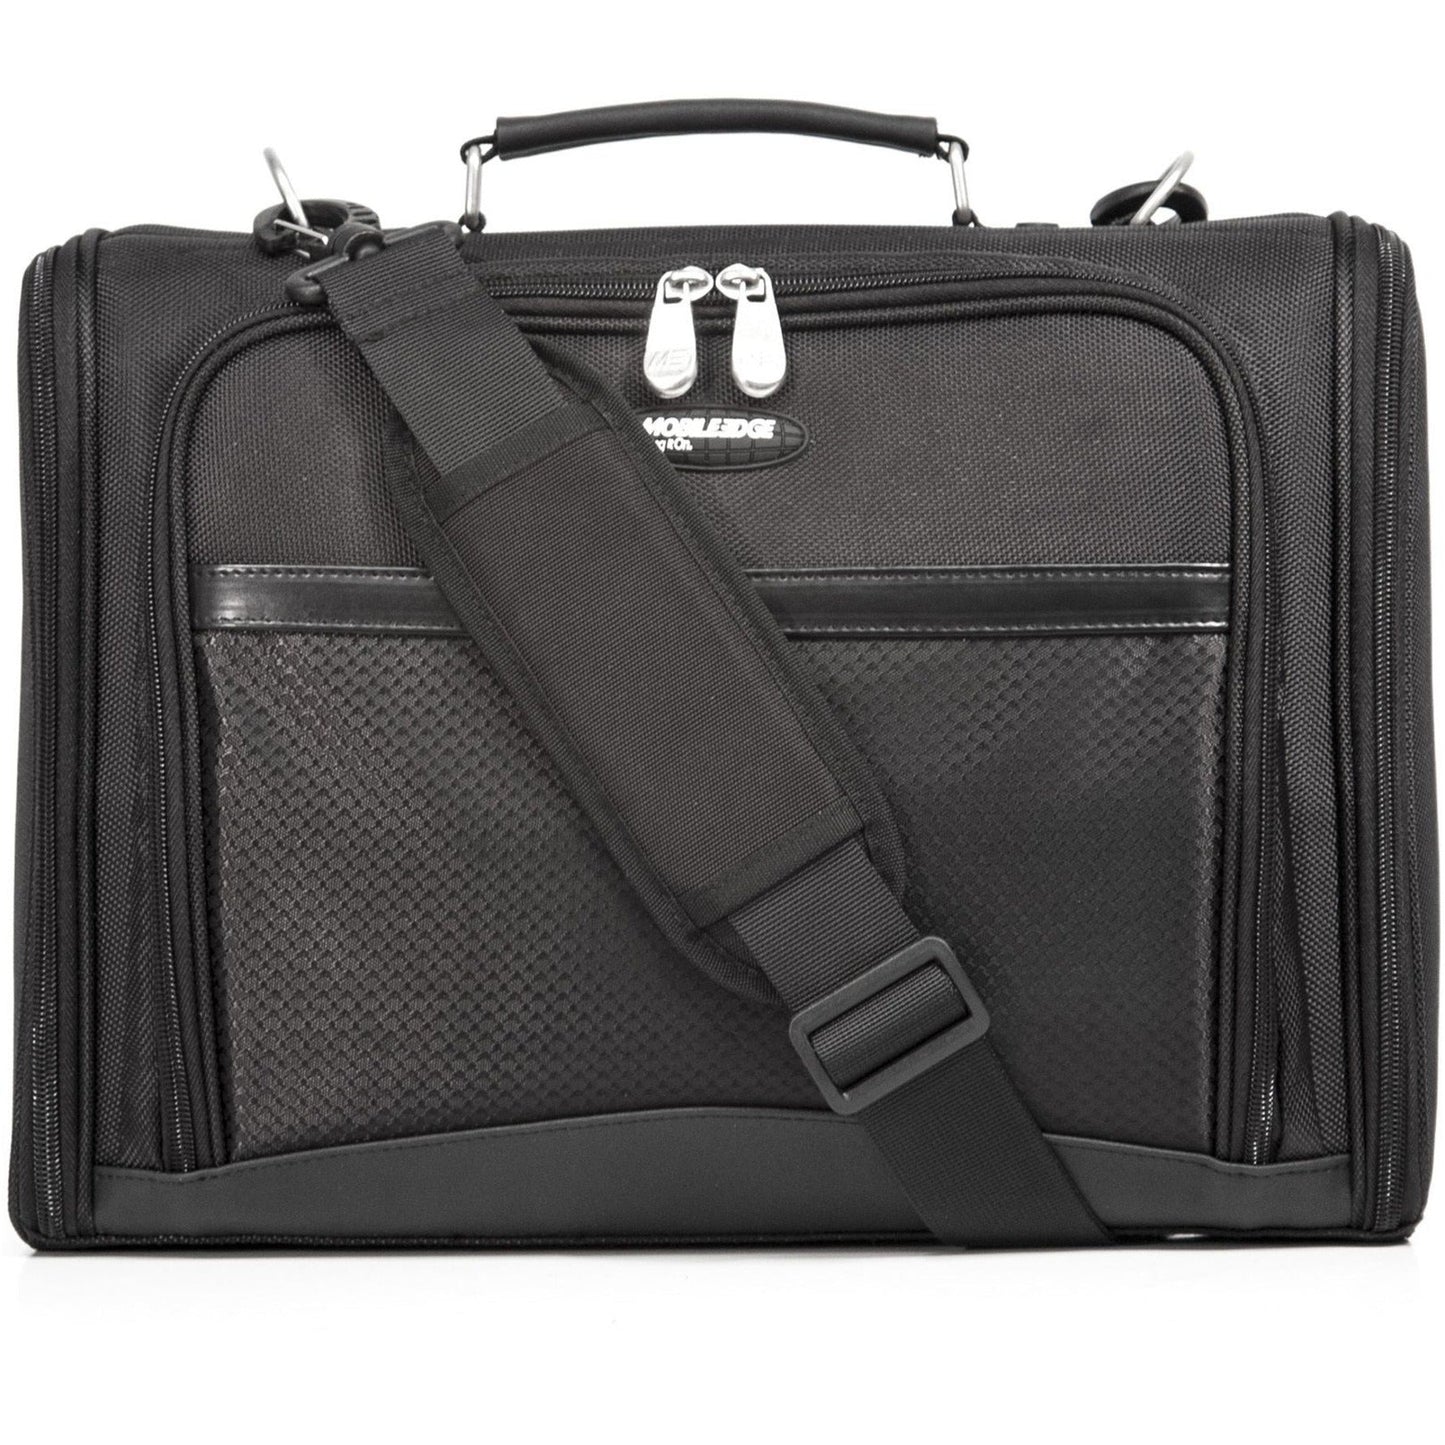 Mobile Edge Express Carrying Case (Briefcase) for 16" Chromebook - Black